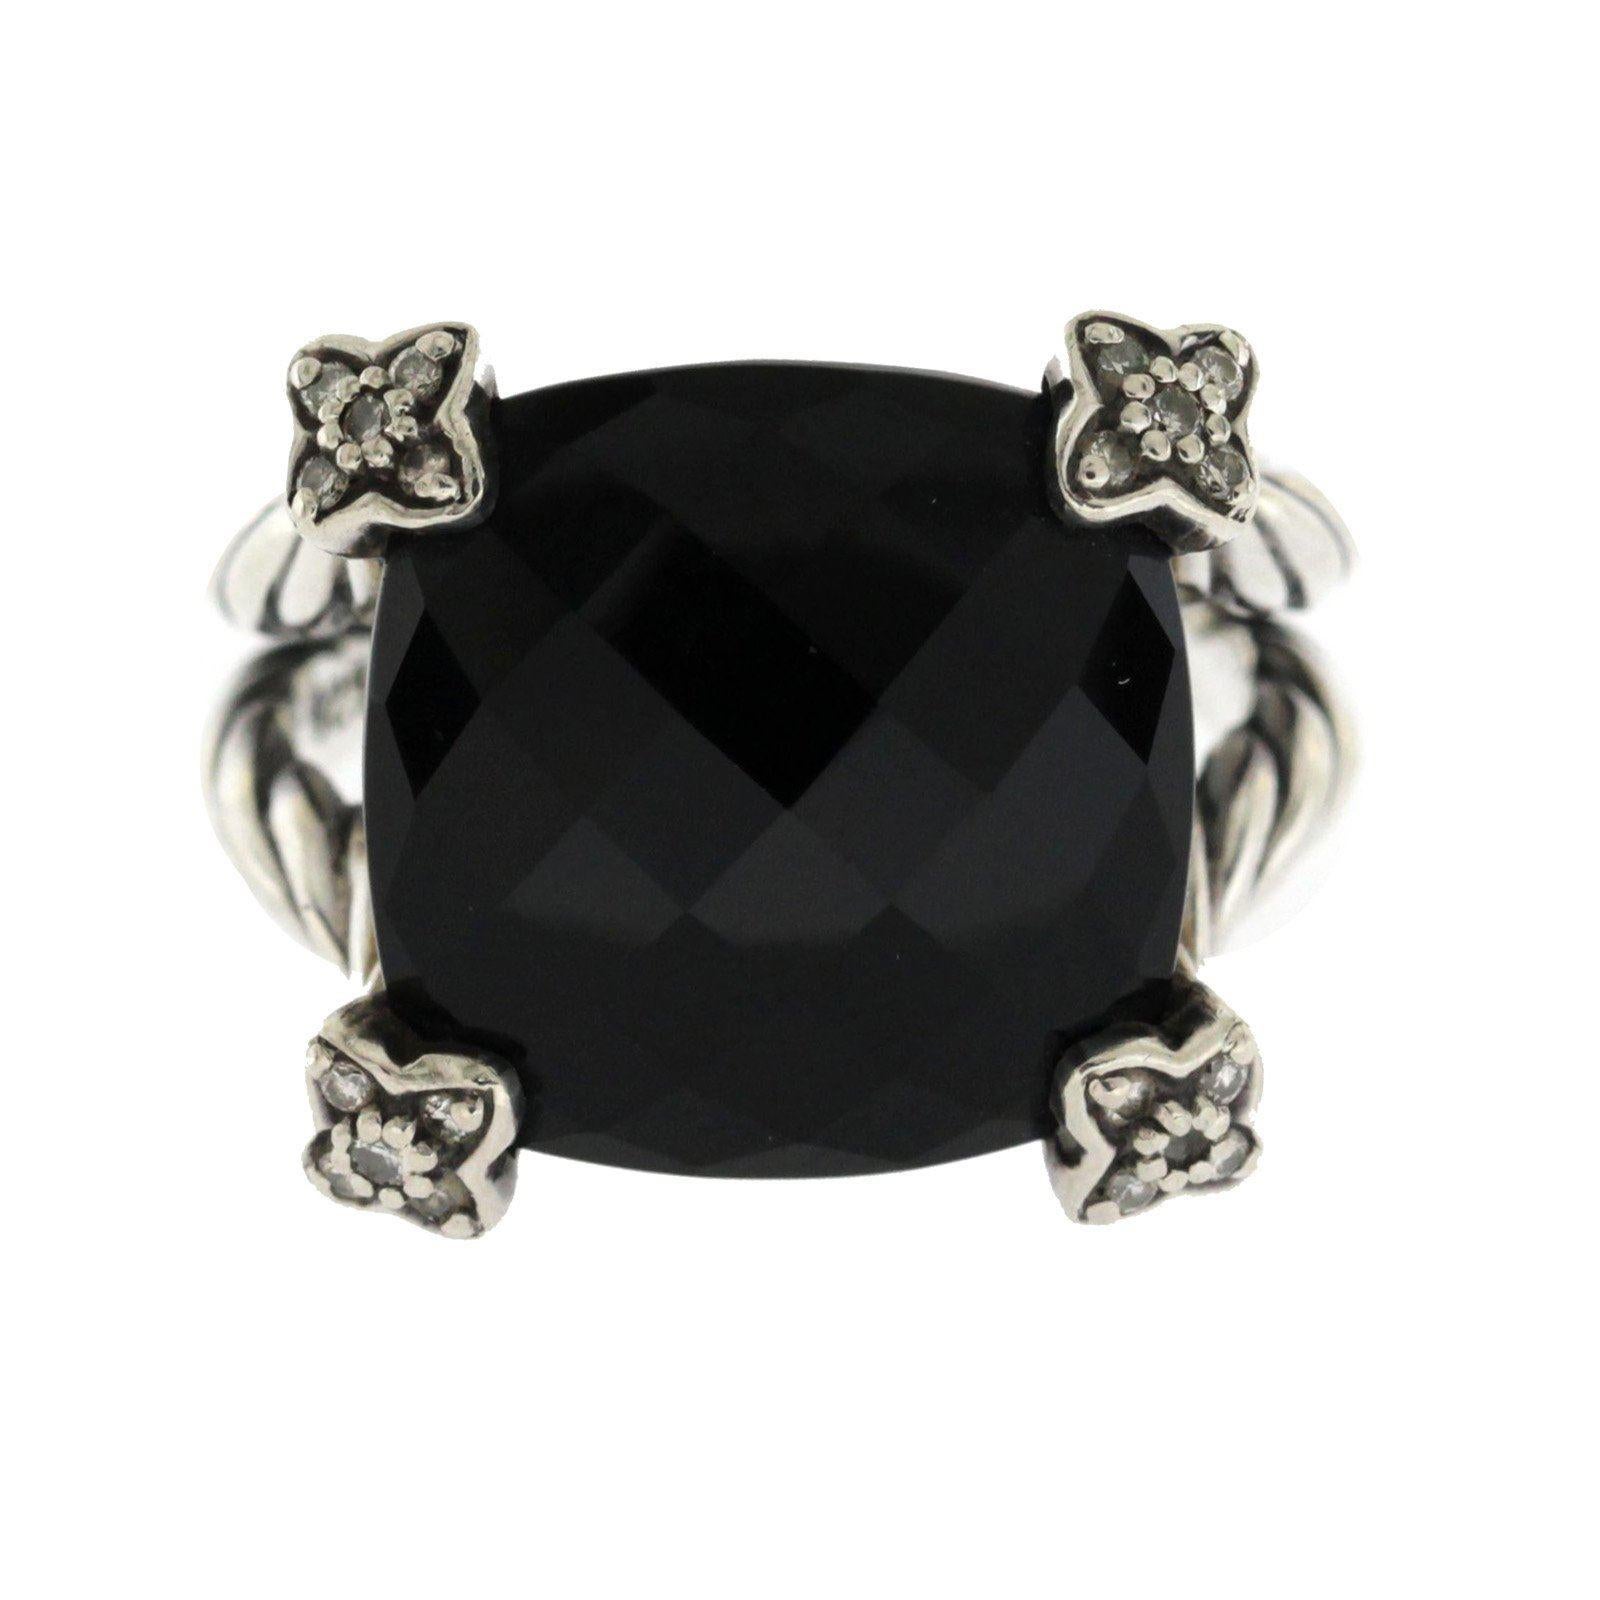 Top: 15 mm
Band Width: 5 mm
Metal: 925 Sterling Silver
Size: 7
Hallmarks: DY 925
Total Weight: 9 Grams
Stone Type: Black Onyx & Diamond
Condition: Pre Owned in Great Condition
Estimated Retail Price: $1300
Stock Number: U415-1